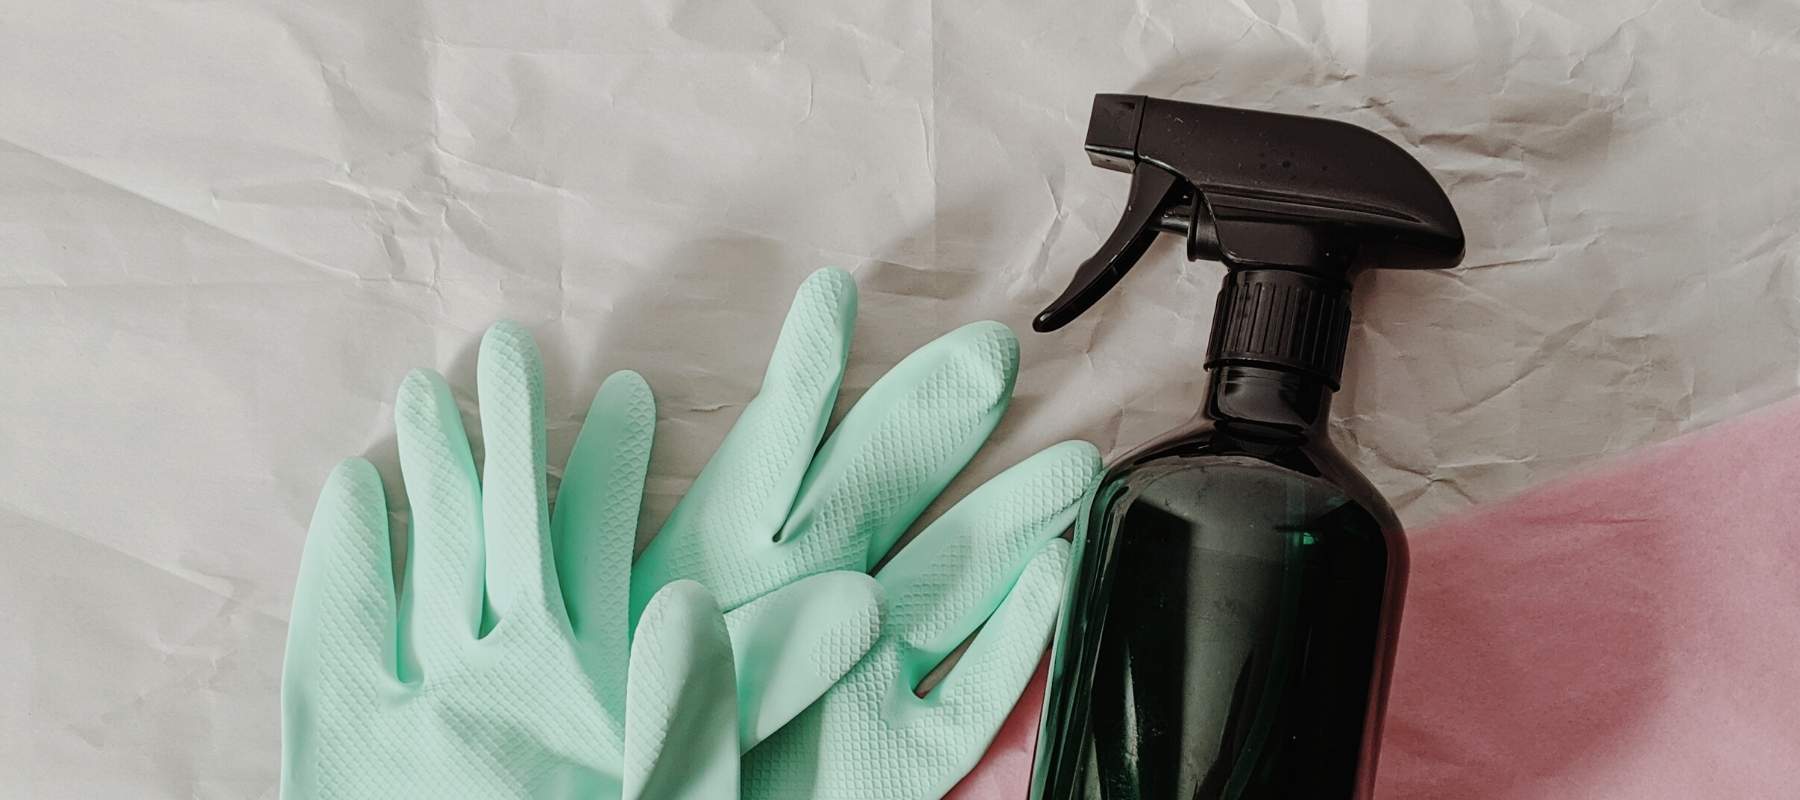 Brown plastic bottle spray and green rubber gloves